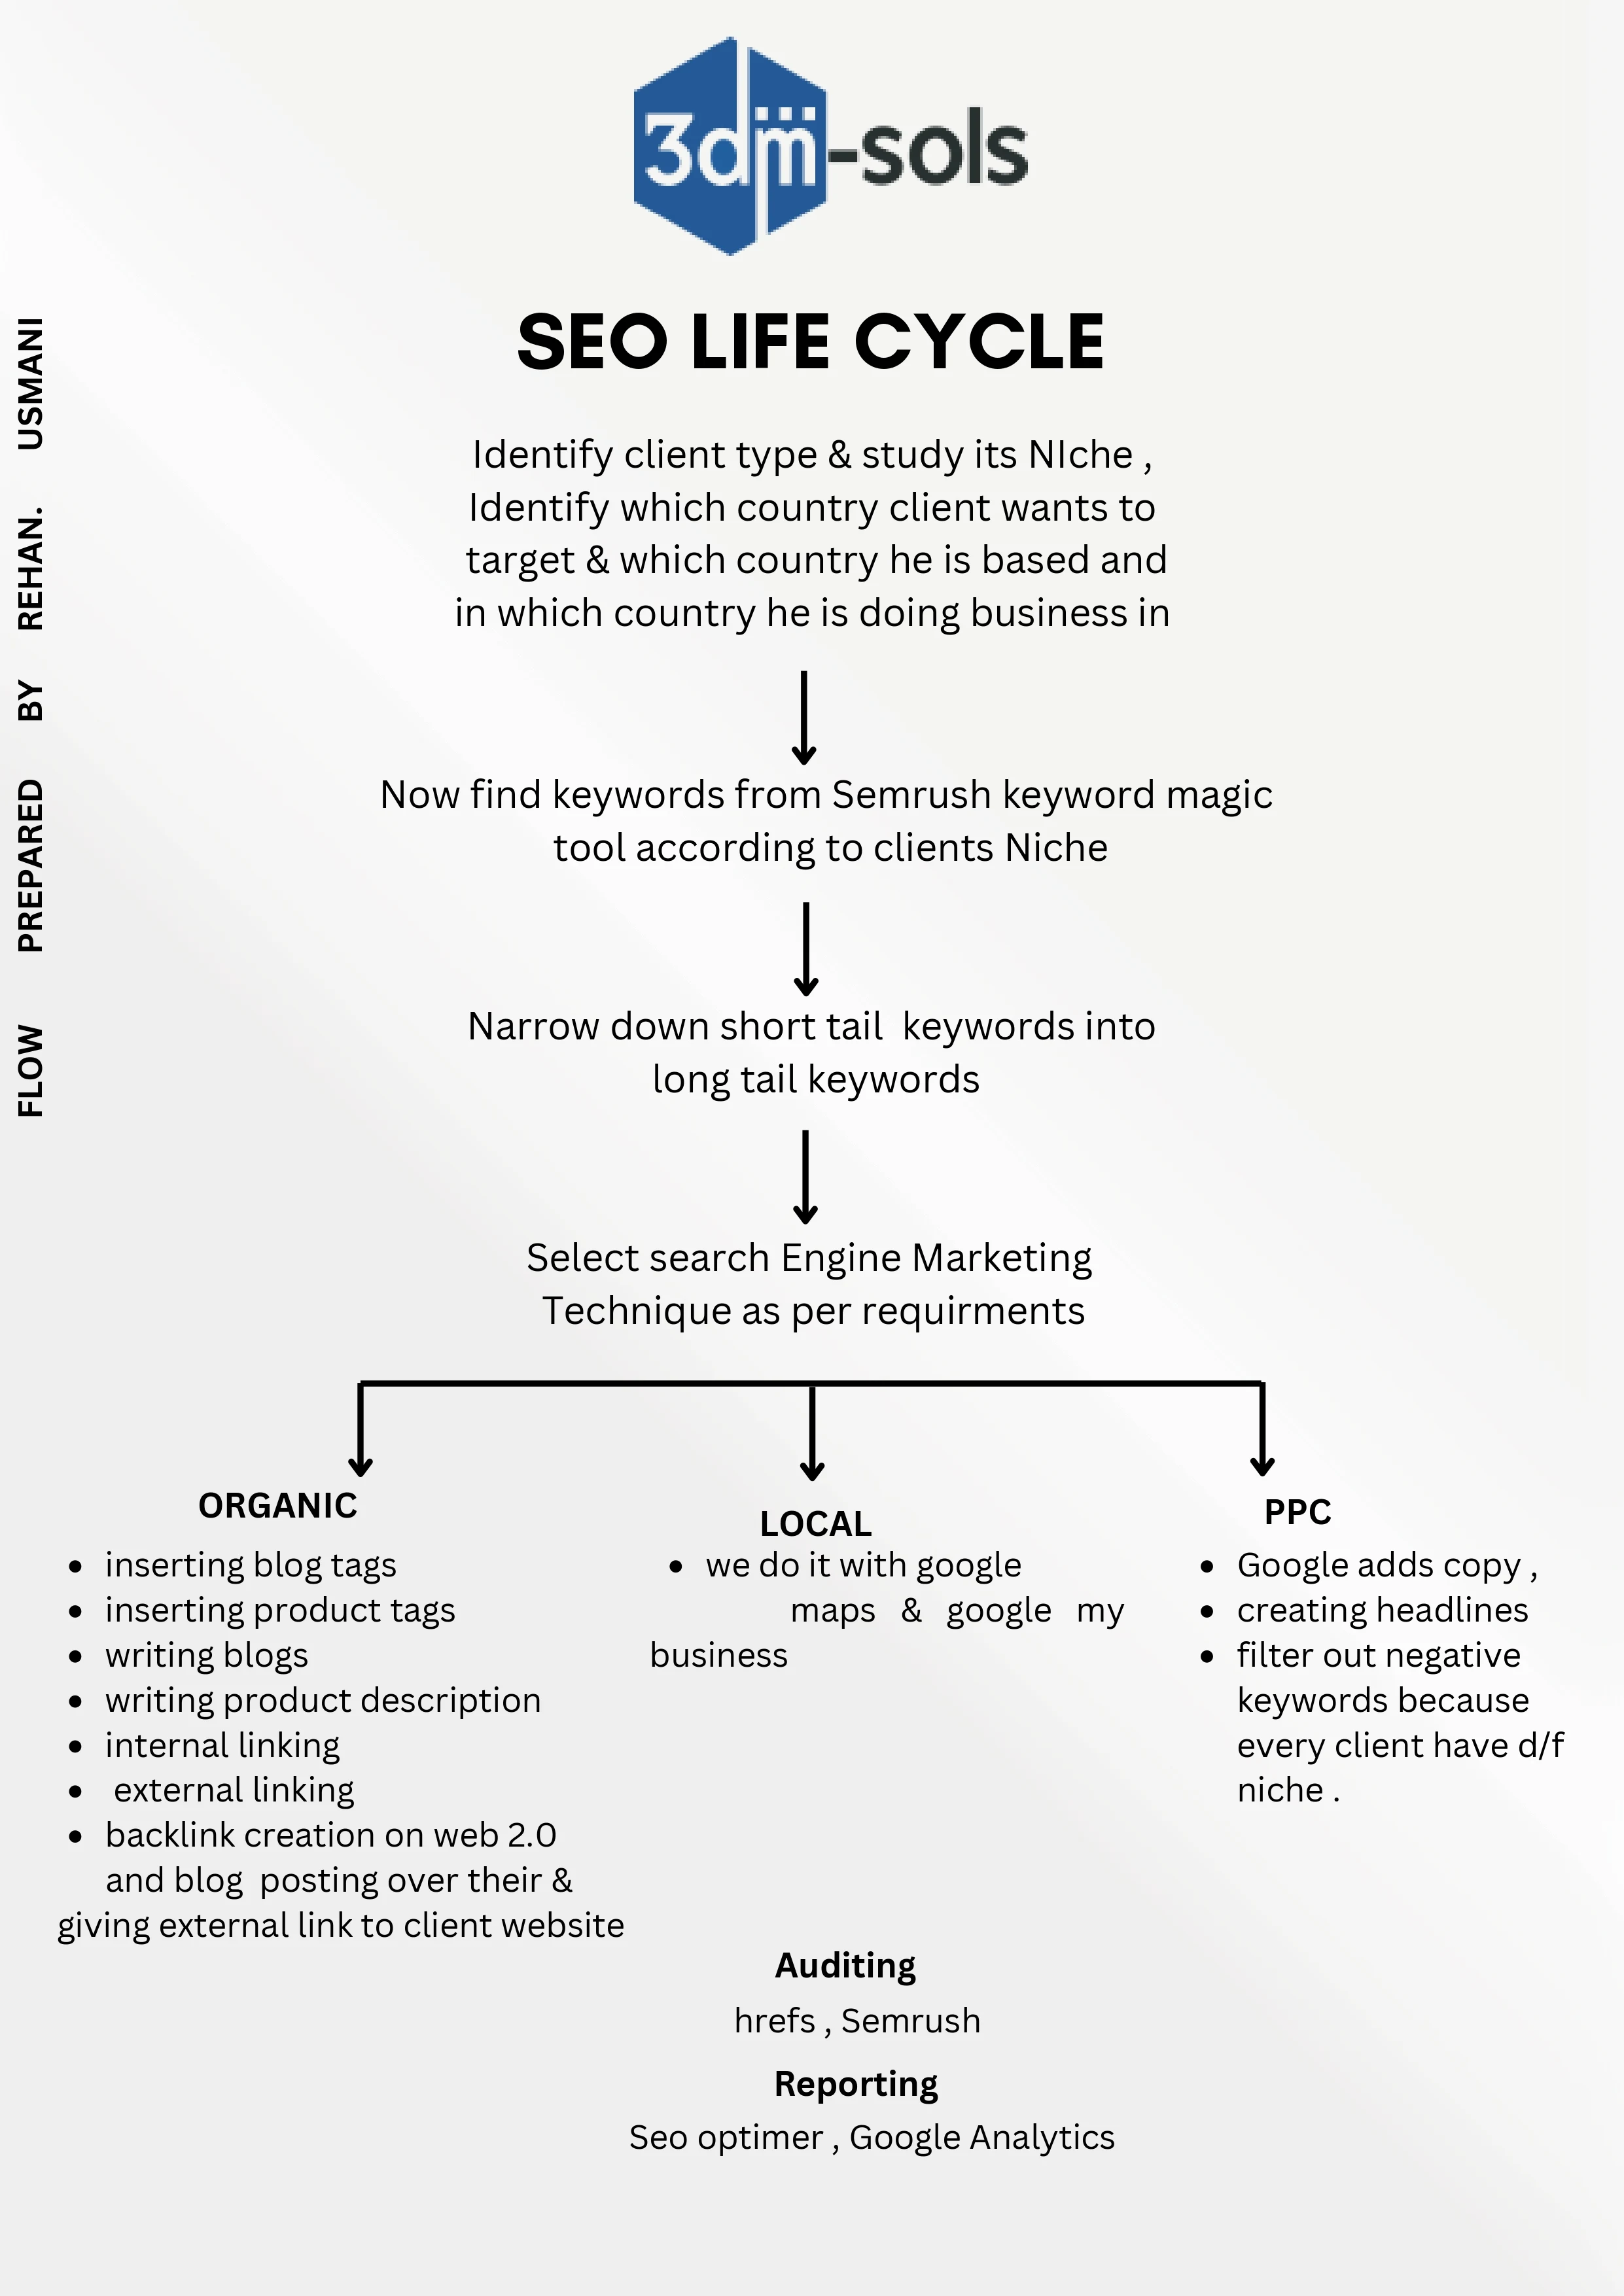 SEO LIFE CYCLE BY REHAN 🐉 CREATED FOR 3DM SOLUTIONS INTERNS